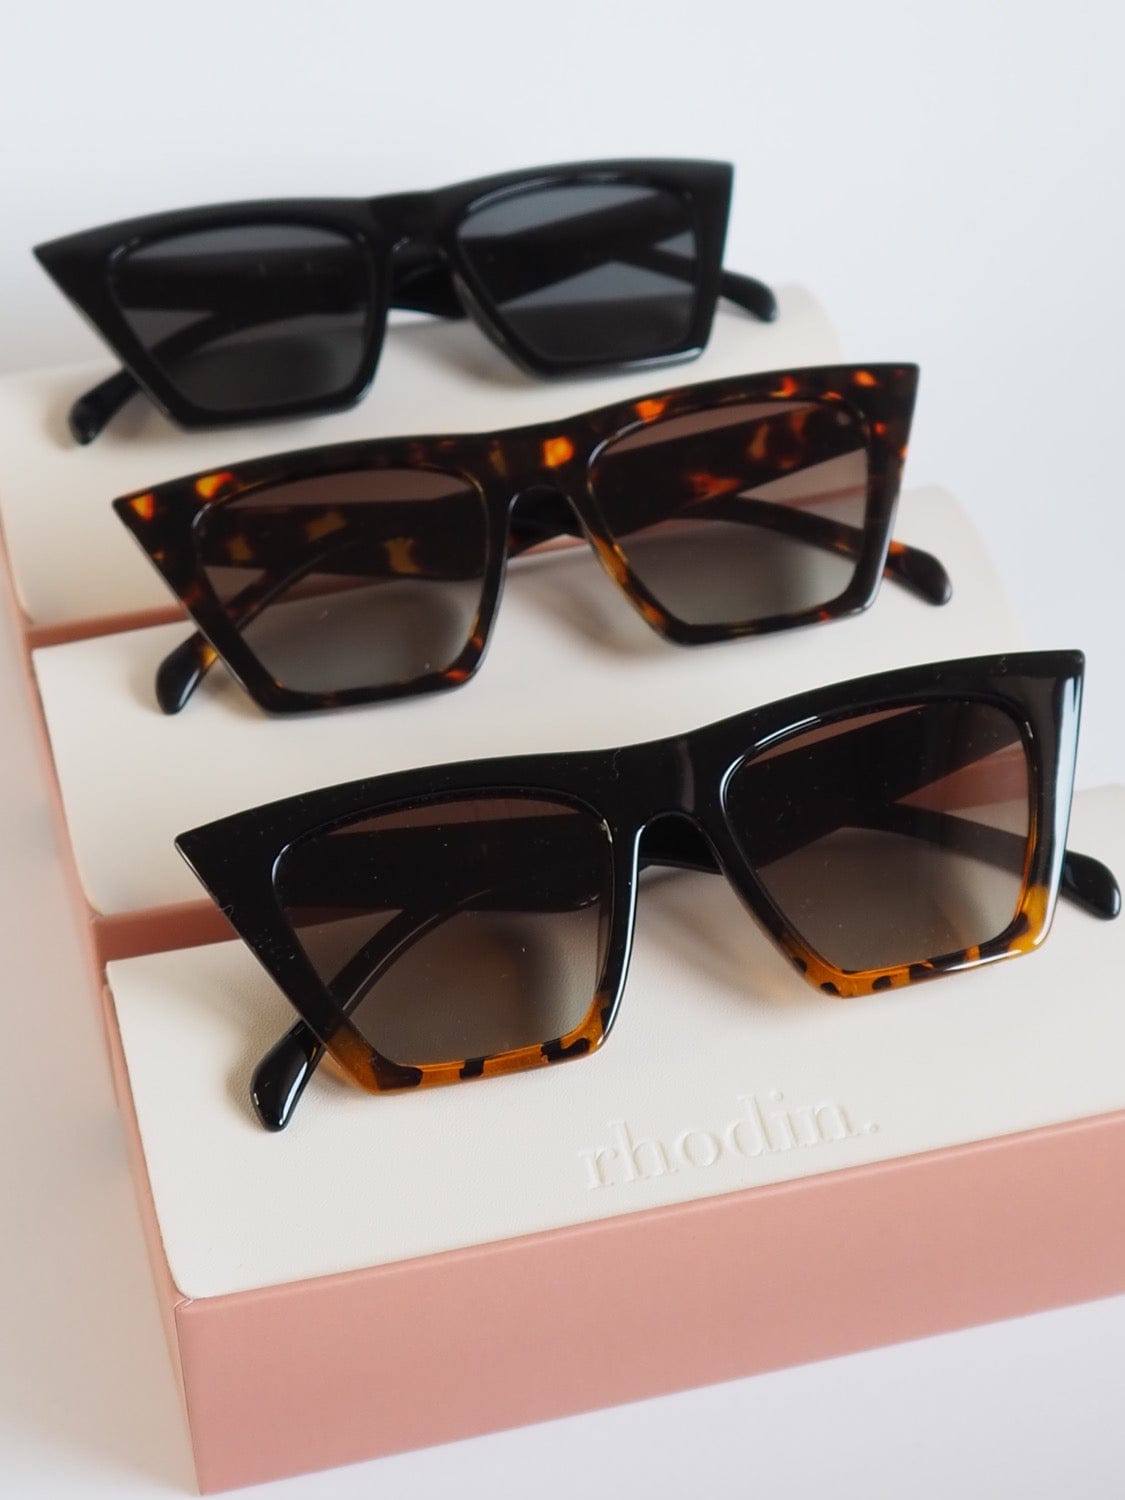 Collection of rhodin sunglasses - SHOP ALL